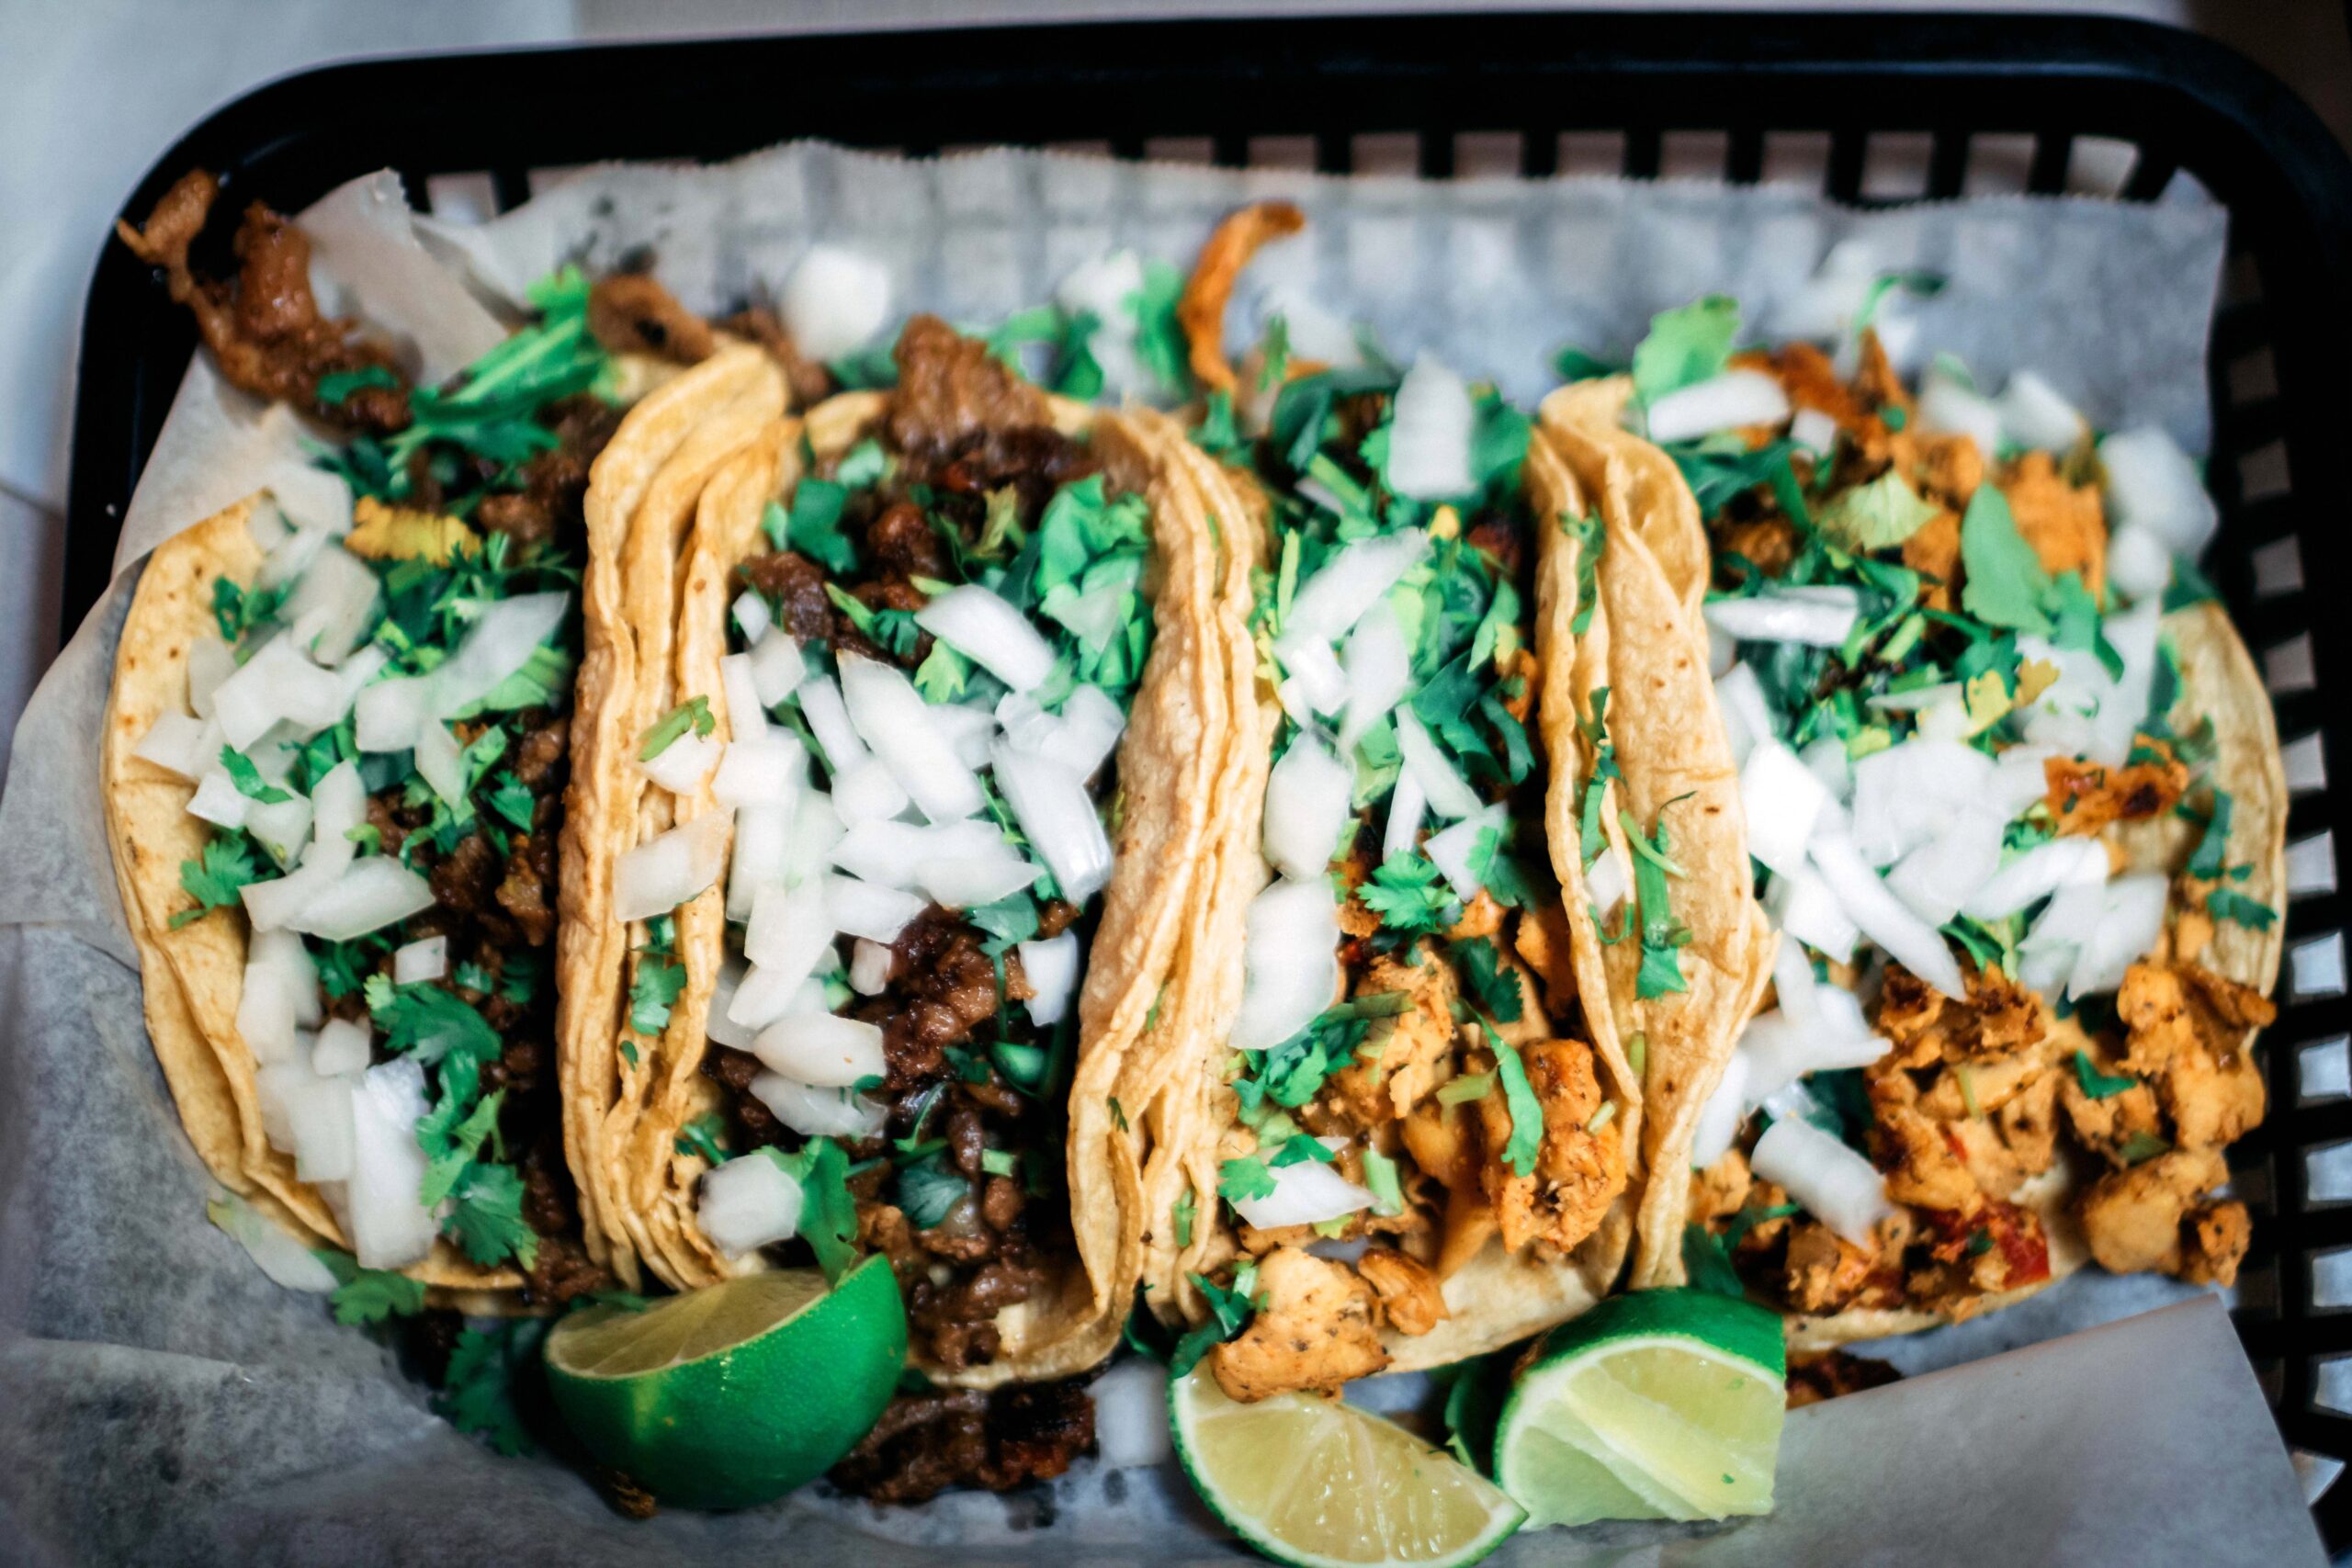 History of Tacos, know the origin of Mexico's most popular dish